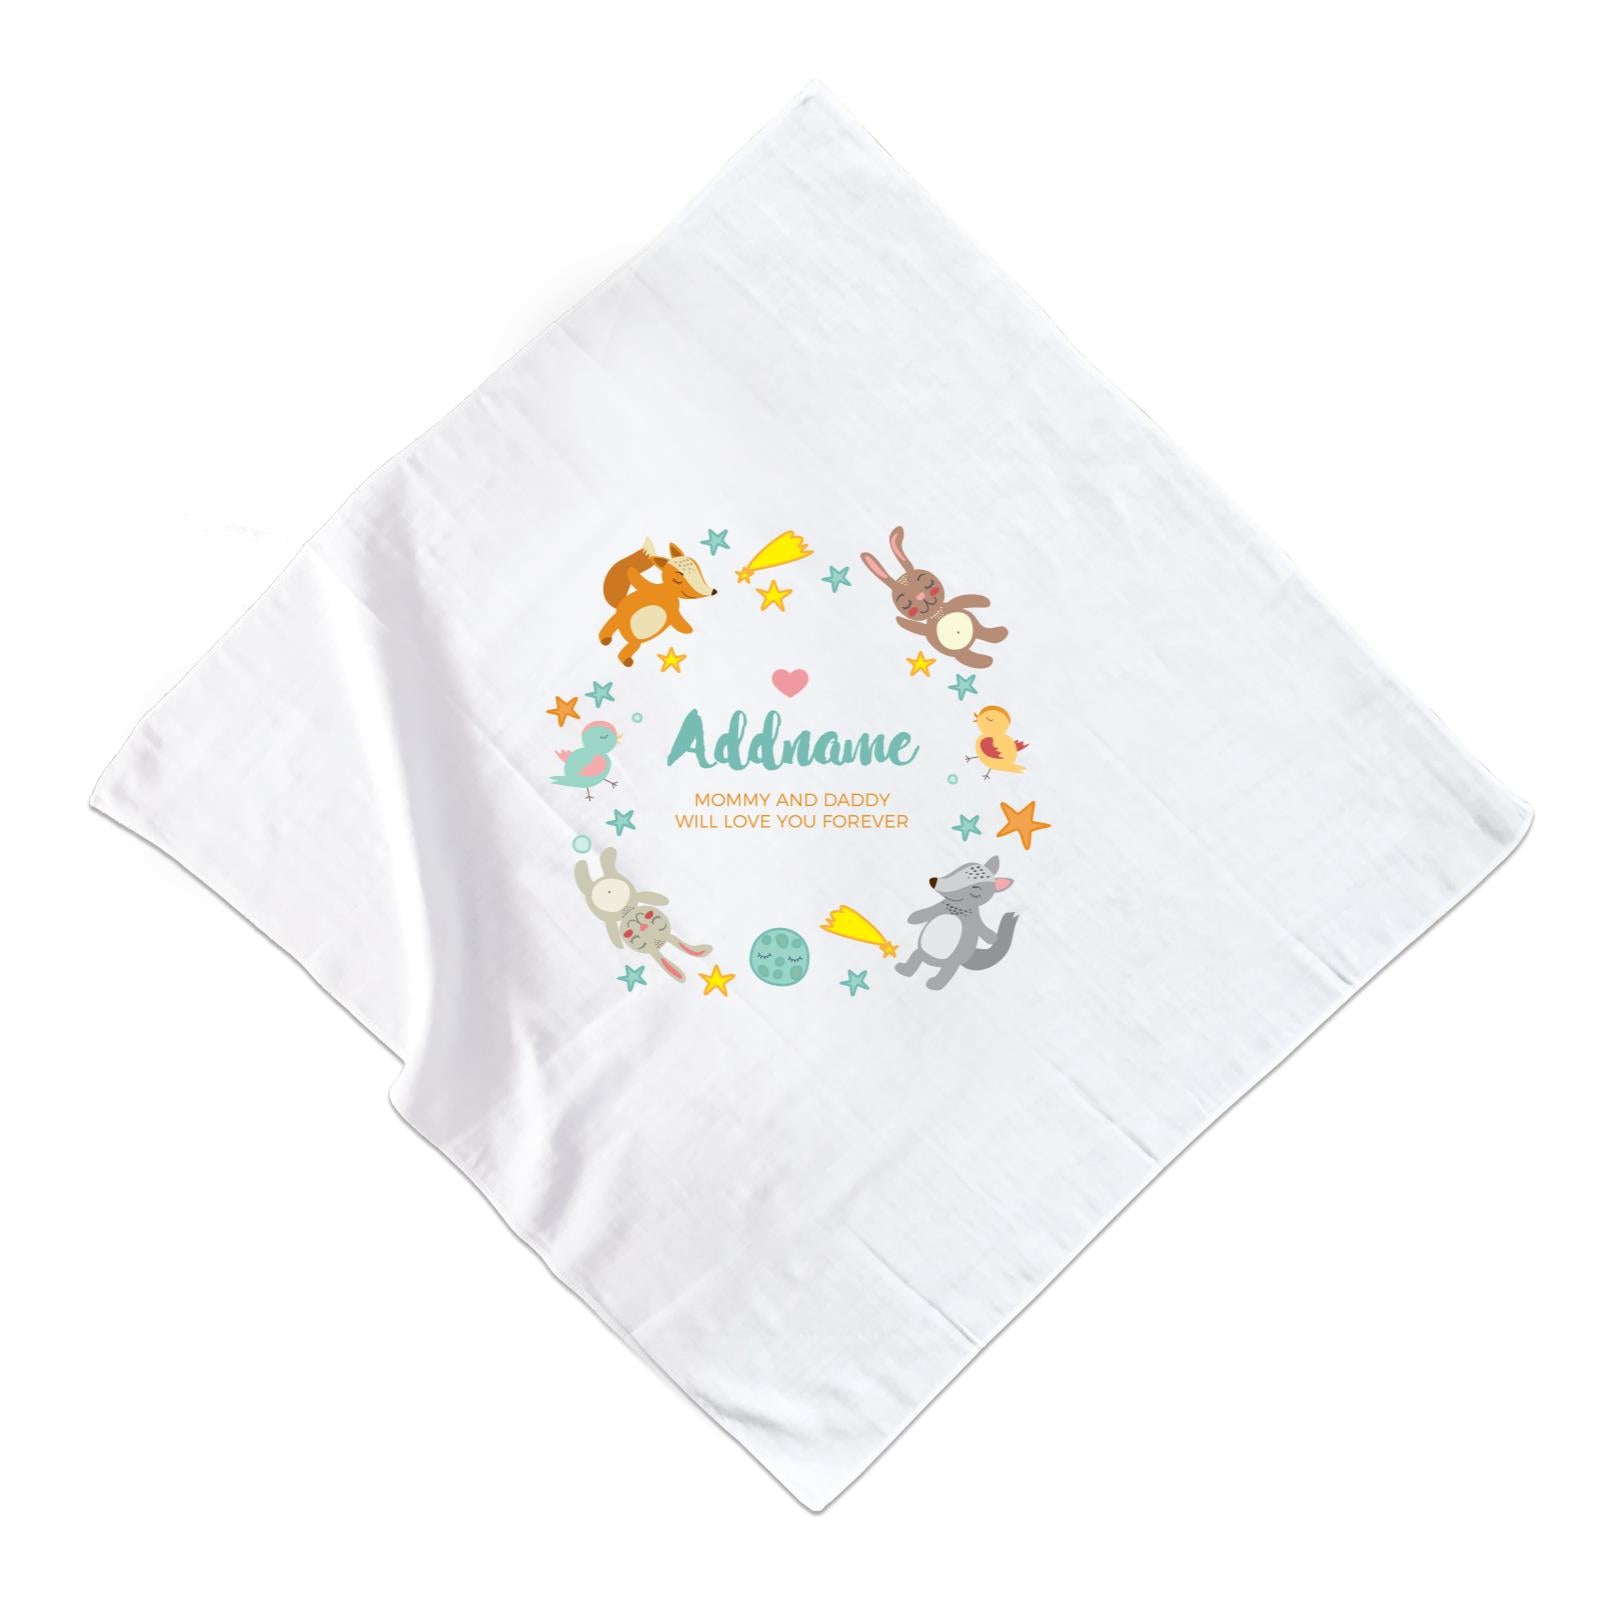 Cute Woodland Animals with Star Elements Personalizable with Name and Text Muslin Square